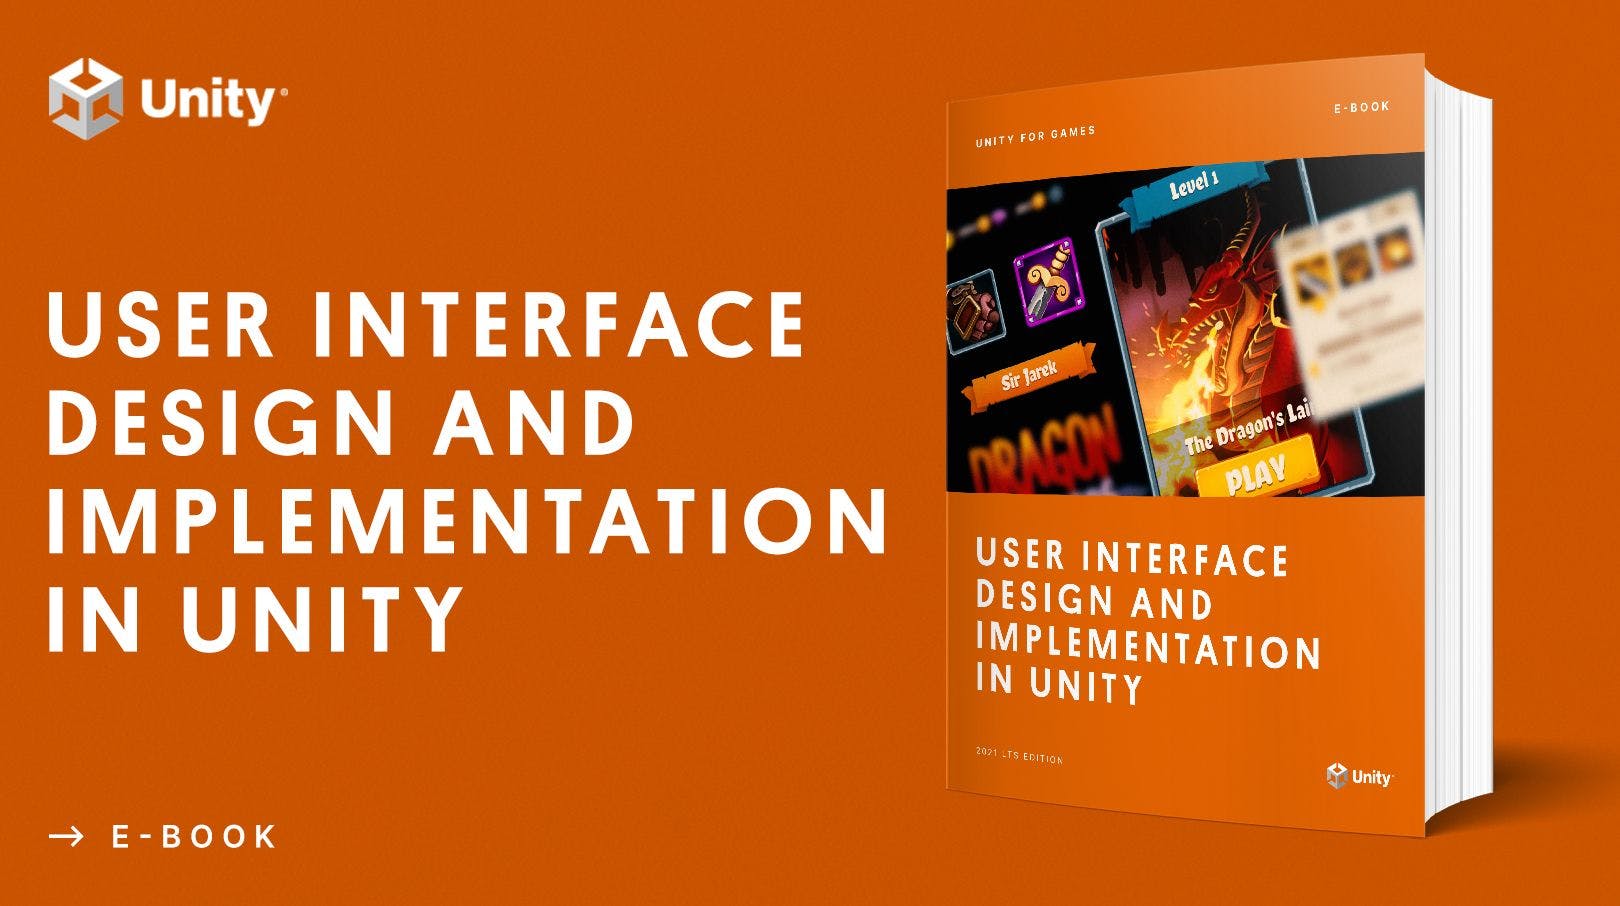 Promo artwork for the 'User interface design and implementation in Unity' e-book